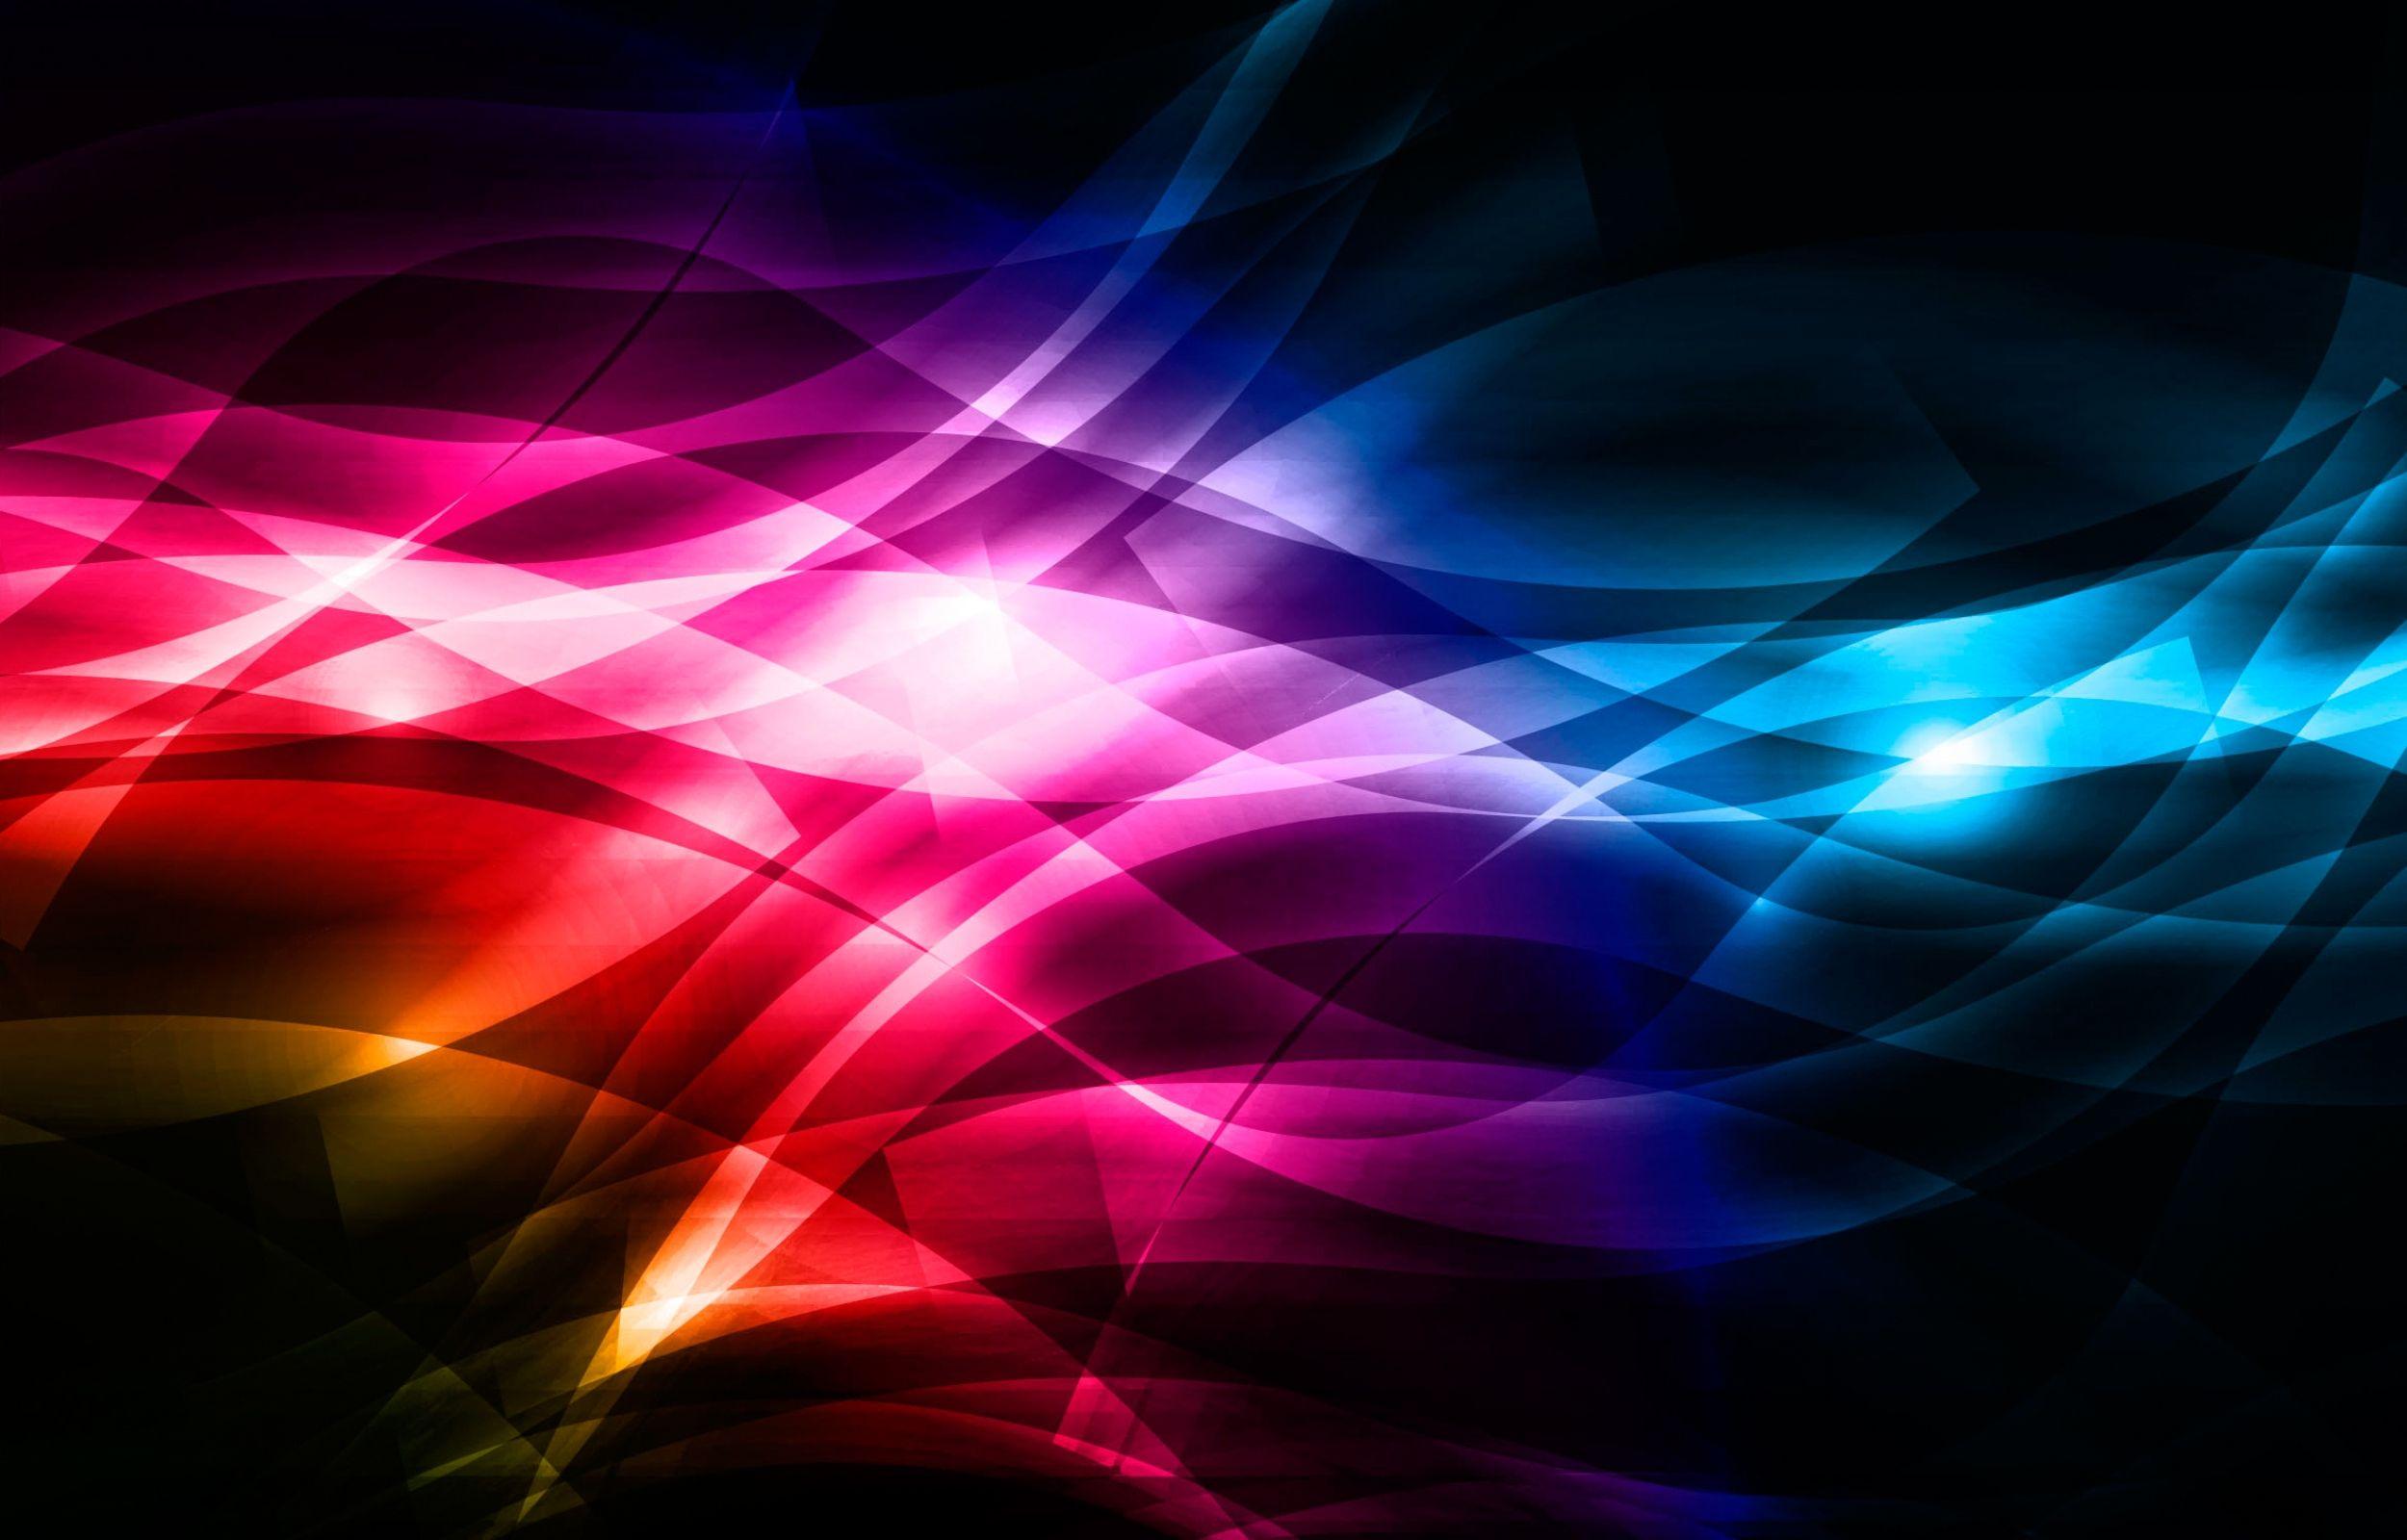 Wallpaper.wiki Free Abstract Background Colorful PIC WPB0012403